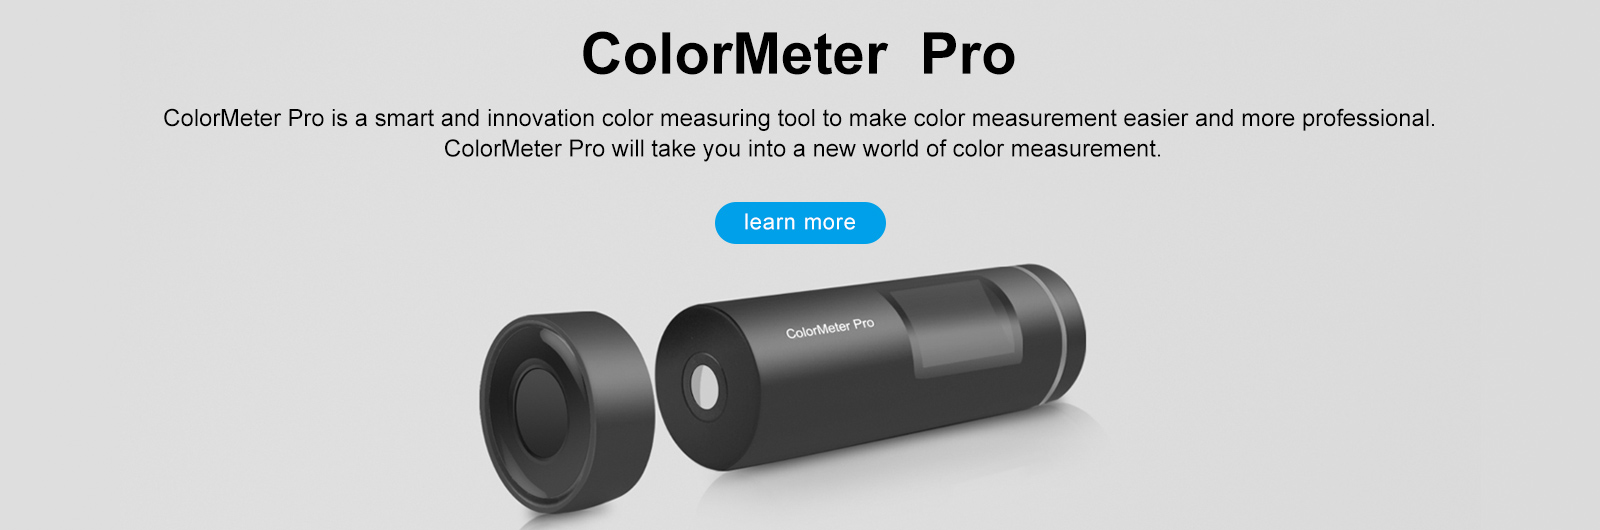 CHNS Colormeter Pro